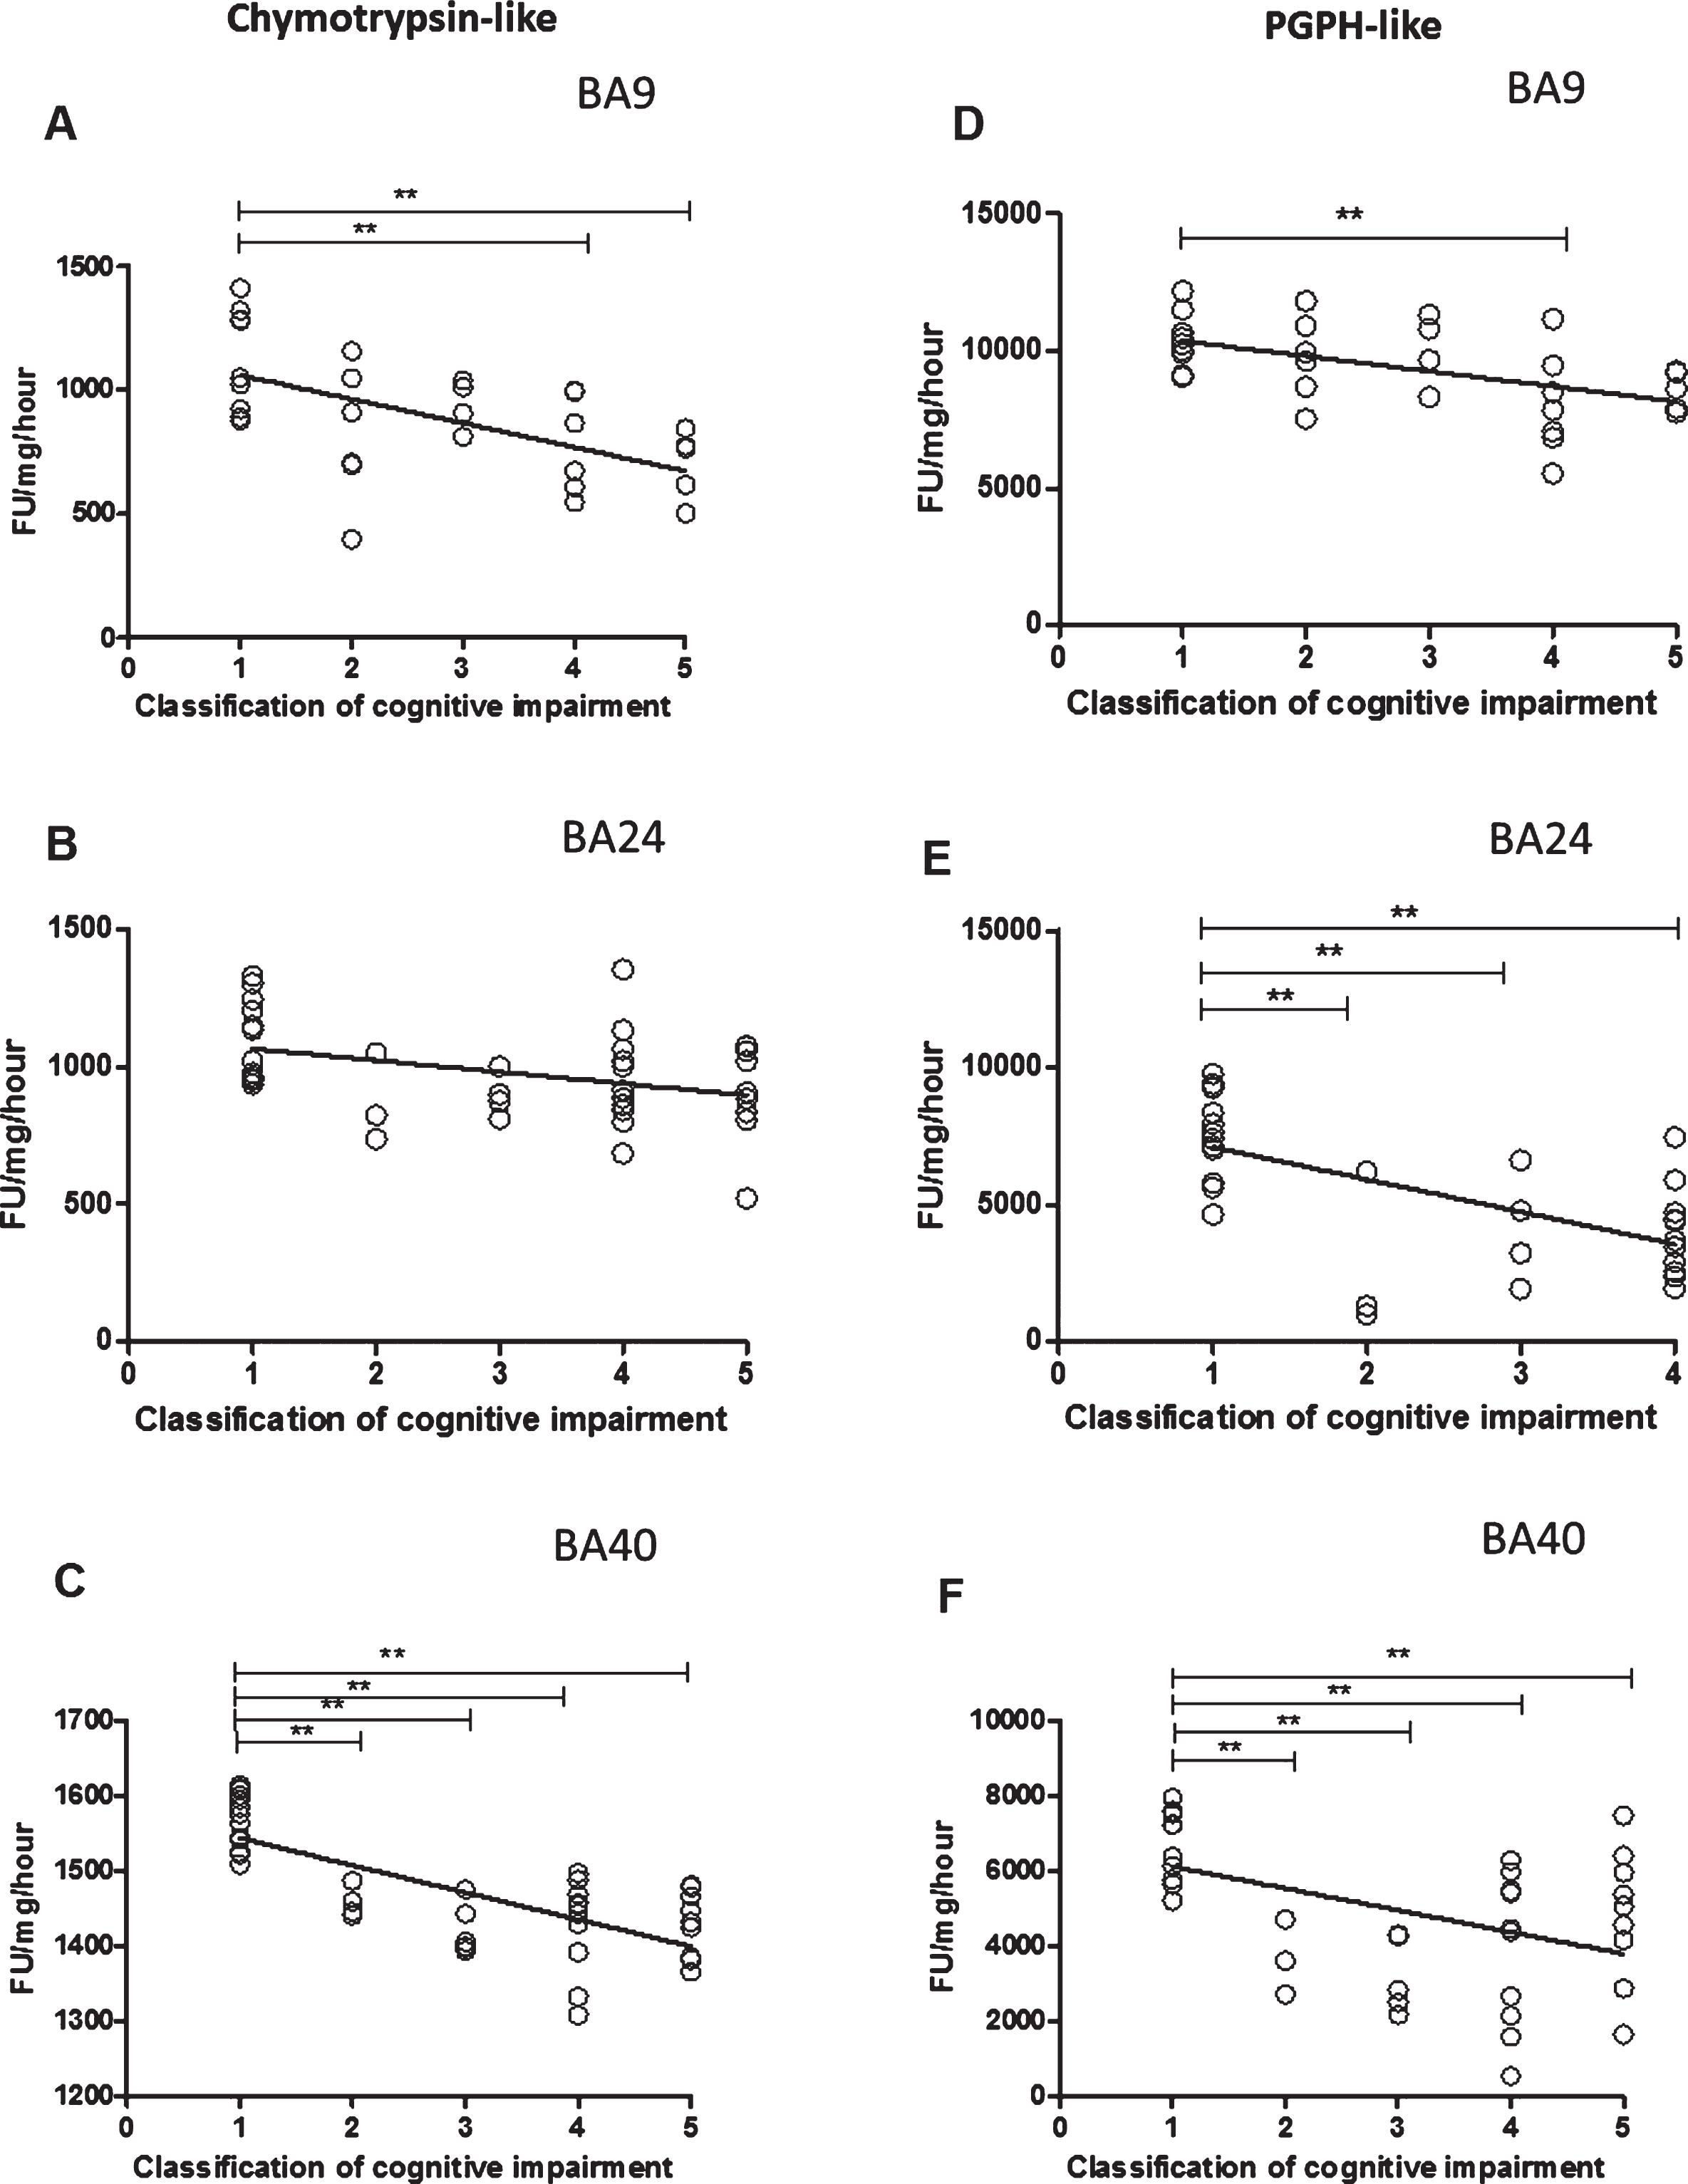 The relationship between Chymotrypsin- and PGPH-like proteasome activity measurement levels and cognitive impairment based upon MMSE classification. Chymotrypsin- and PGPH-like proteasome activity measurement levels, using fluorogenic substrate assay, predicted cognitive impairment in BA9, BA24, and BA40. Regression analysis showed Chymotrypsin-like and PGPH proteasome activity to be a significant predictor of cognitive impairment in BA9 (A and D, R2 = 0.337, beta = –0.581, [df] = 1, 29, t = –3.84, p = 0.001, R2 = 0.275, beta = –0.524, [df] = 1, 29, t = –3.315, p = 0.002), in BA24 (B and E, R2 = 0.151, beta = –0.388, [df] = 1, 38, t = –2.599, p = 0.013, R2 = 0.371, beta = –0.609, [df] = 1, 38, t = –4.733, p = 0.001), and in BA40 (C and F, R2 = 0.531, beta = –0.728, [df] = 1, 40, t = –6.72, p = 0.001, R2 = 0.217, beta = –0.466, [df] = 1, 38, t = –3.244, p = 0.002). The difference in mean Chymotrypsin-like and PGPH proteasome activity measurement levels between different cognitive impairment groups was analyzed by one-way ANOVA and the Bonferroni post hoc test, which revealed high chymotrypsin-like activity in the controls compared with moderate (p = 0.014) and severe scores (p = 0.01) (one-way ANOVA F = 5.009, d.f.  = 4 and 26, p = 0.004; Bonferroni post hoc test). There was a high PGPH-like activity in unimpaired cognition compared with the moderate groups (one-way ANOVA F = 3.616, d.f.  = 4 and 26, p = 0.004; Bonferroni post hoc test). In BA24, there was higher PGPH-like activity in unimpaired cognition group compared with MCI (p = 0.03), mild (p = 0.024), moderate (p = 0.001) and severe scores (p = 0.001) (one-way ANOVA F = 9.839, d.f.  = 4 and 35, p = 0.001; Bonferroni post hoc test). In BA40 the level of chymotrypsin-like activity was significantly higher in the controls compared with MCI (p = 0.001), mild (p = 0.001), moderate (p = 0.001) and severe scores (p = 0.001) (one-way ANOVA F = 21.845, d.f.  = 4 and 37, p = 0.001; Bonferroni post hoc test). There was a higher level of PGPH-like activity in unimpaired cognition group compared with MCI (p = 0.02), mild (p = 0.001), moderate (p = 0.001) and severe scores (p = 0.034) (one-way ANOVA F = 8.851, d.f.  = 4 and 35, p = 0.001; Bonferroni post hoc test). (**p < 0.01).